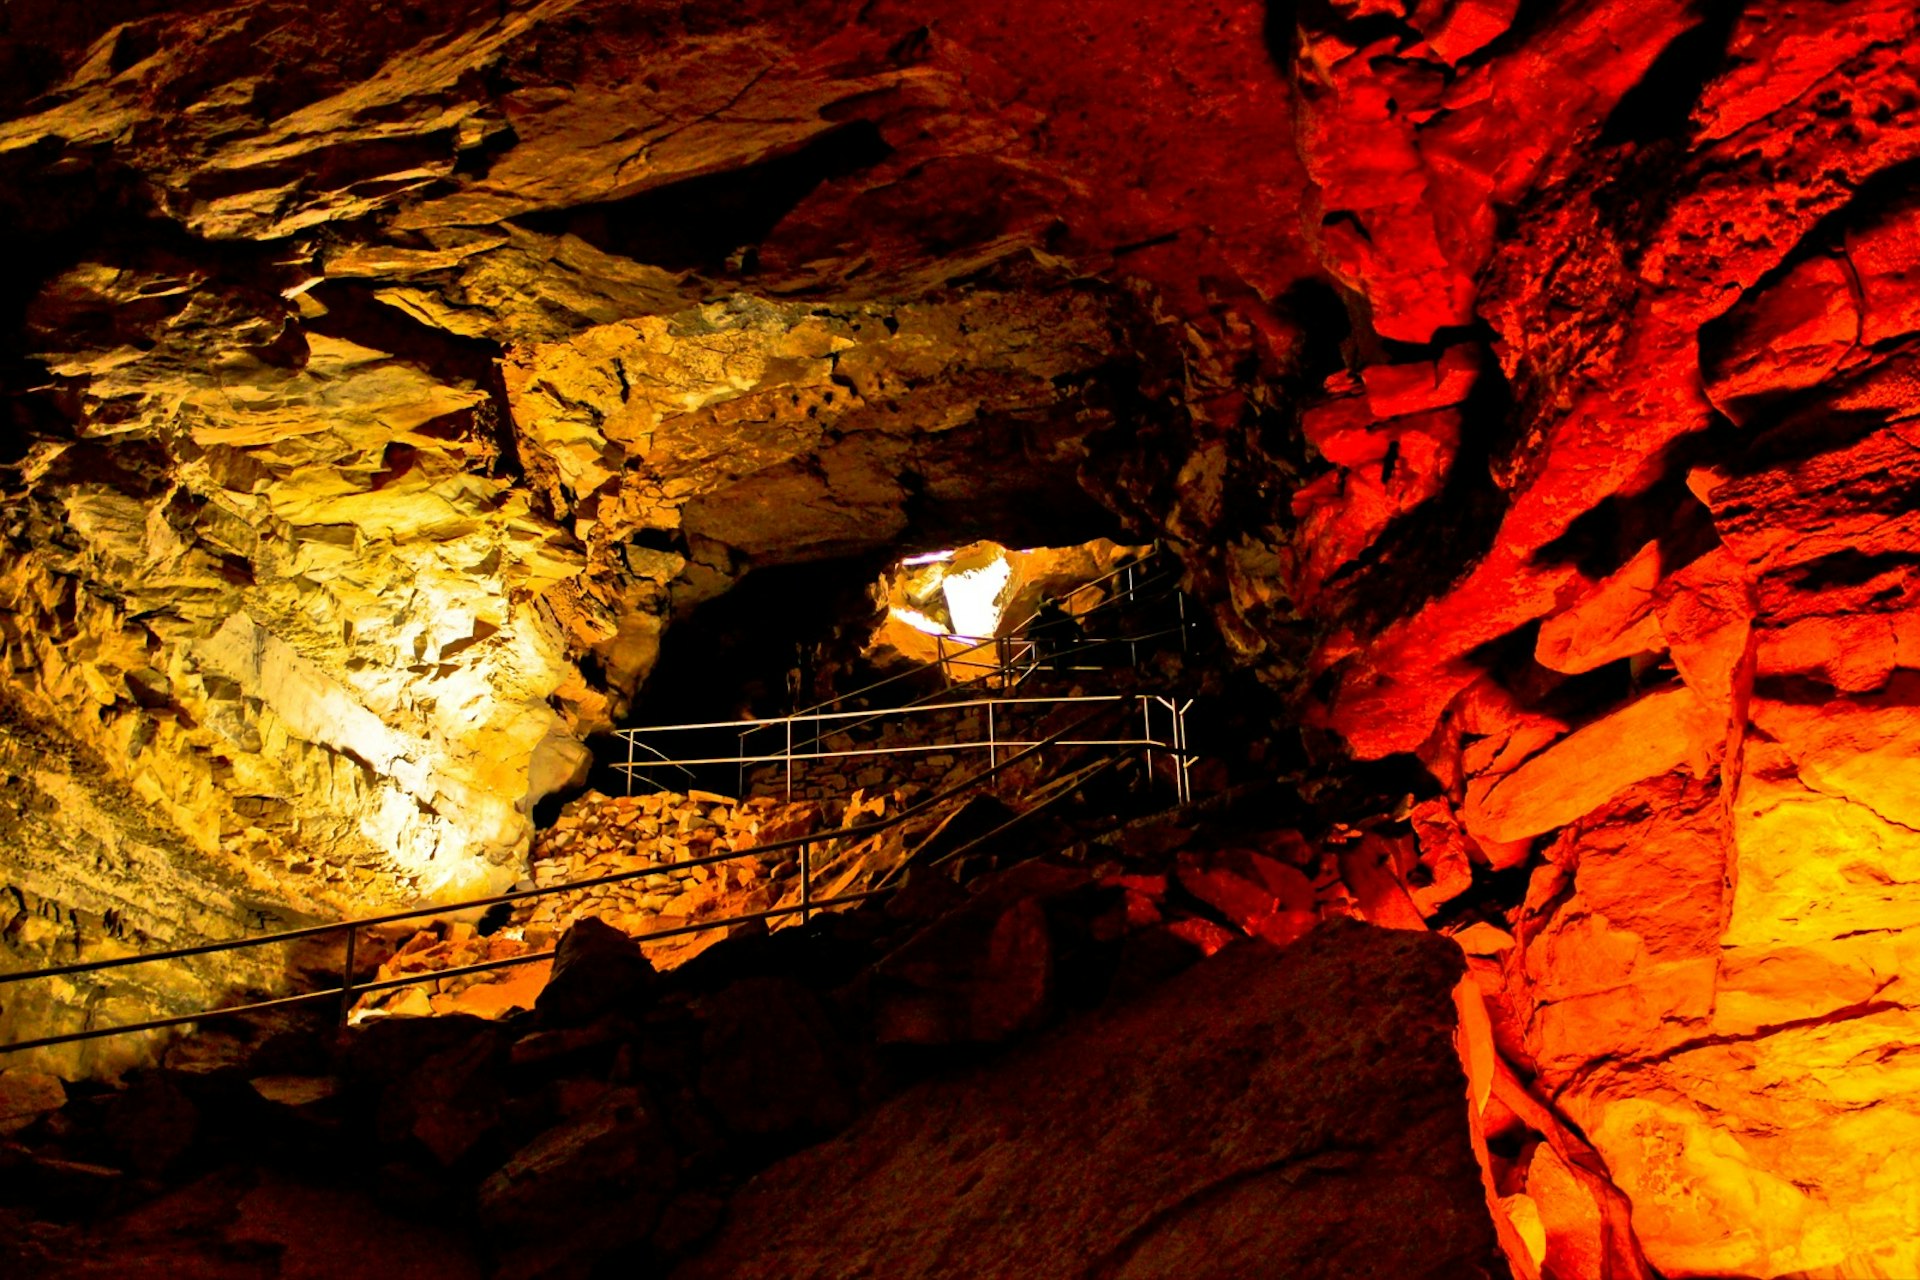 Railings and lights lead the way through a dark cave passage in Kentucky. Mammoth Cave is one of several supersized natural wonders in the US National Parks system 